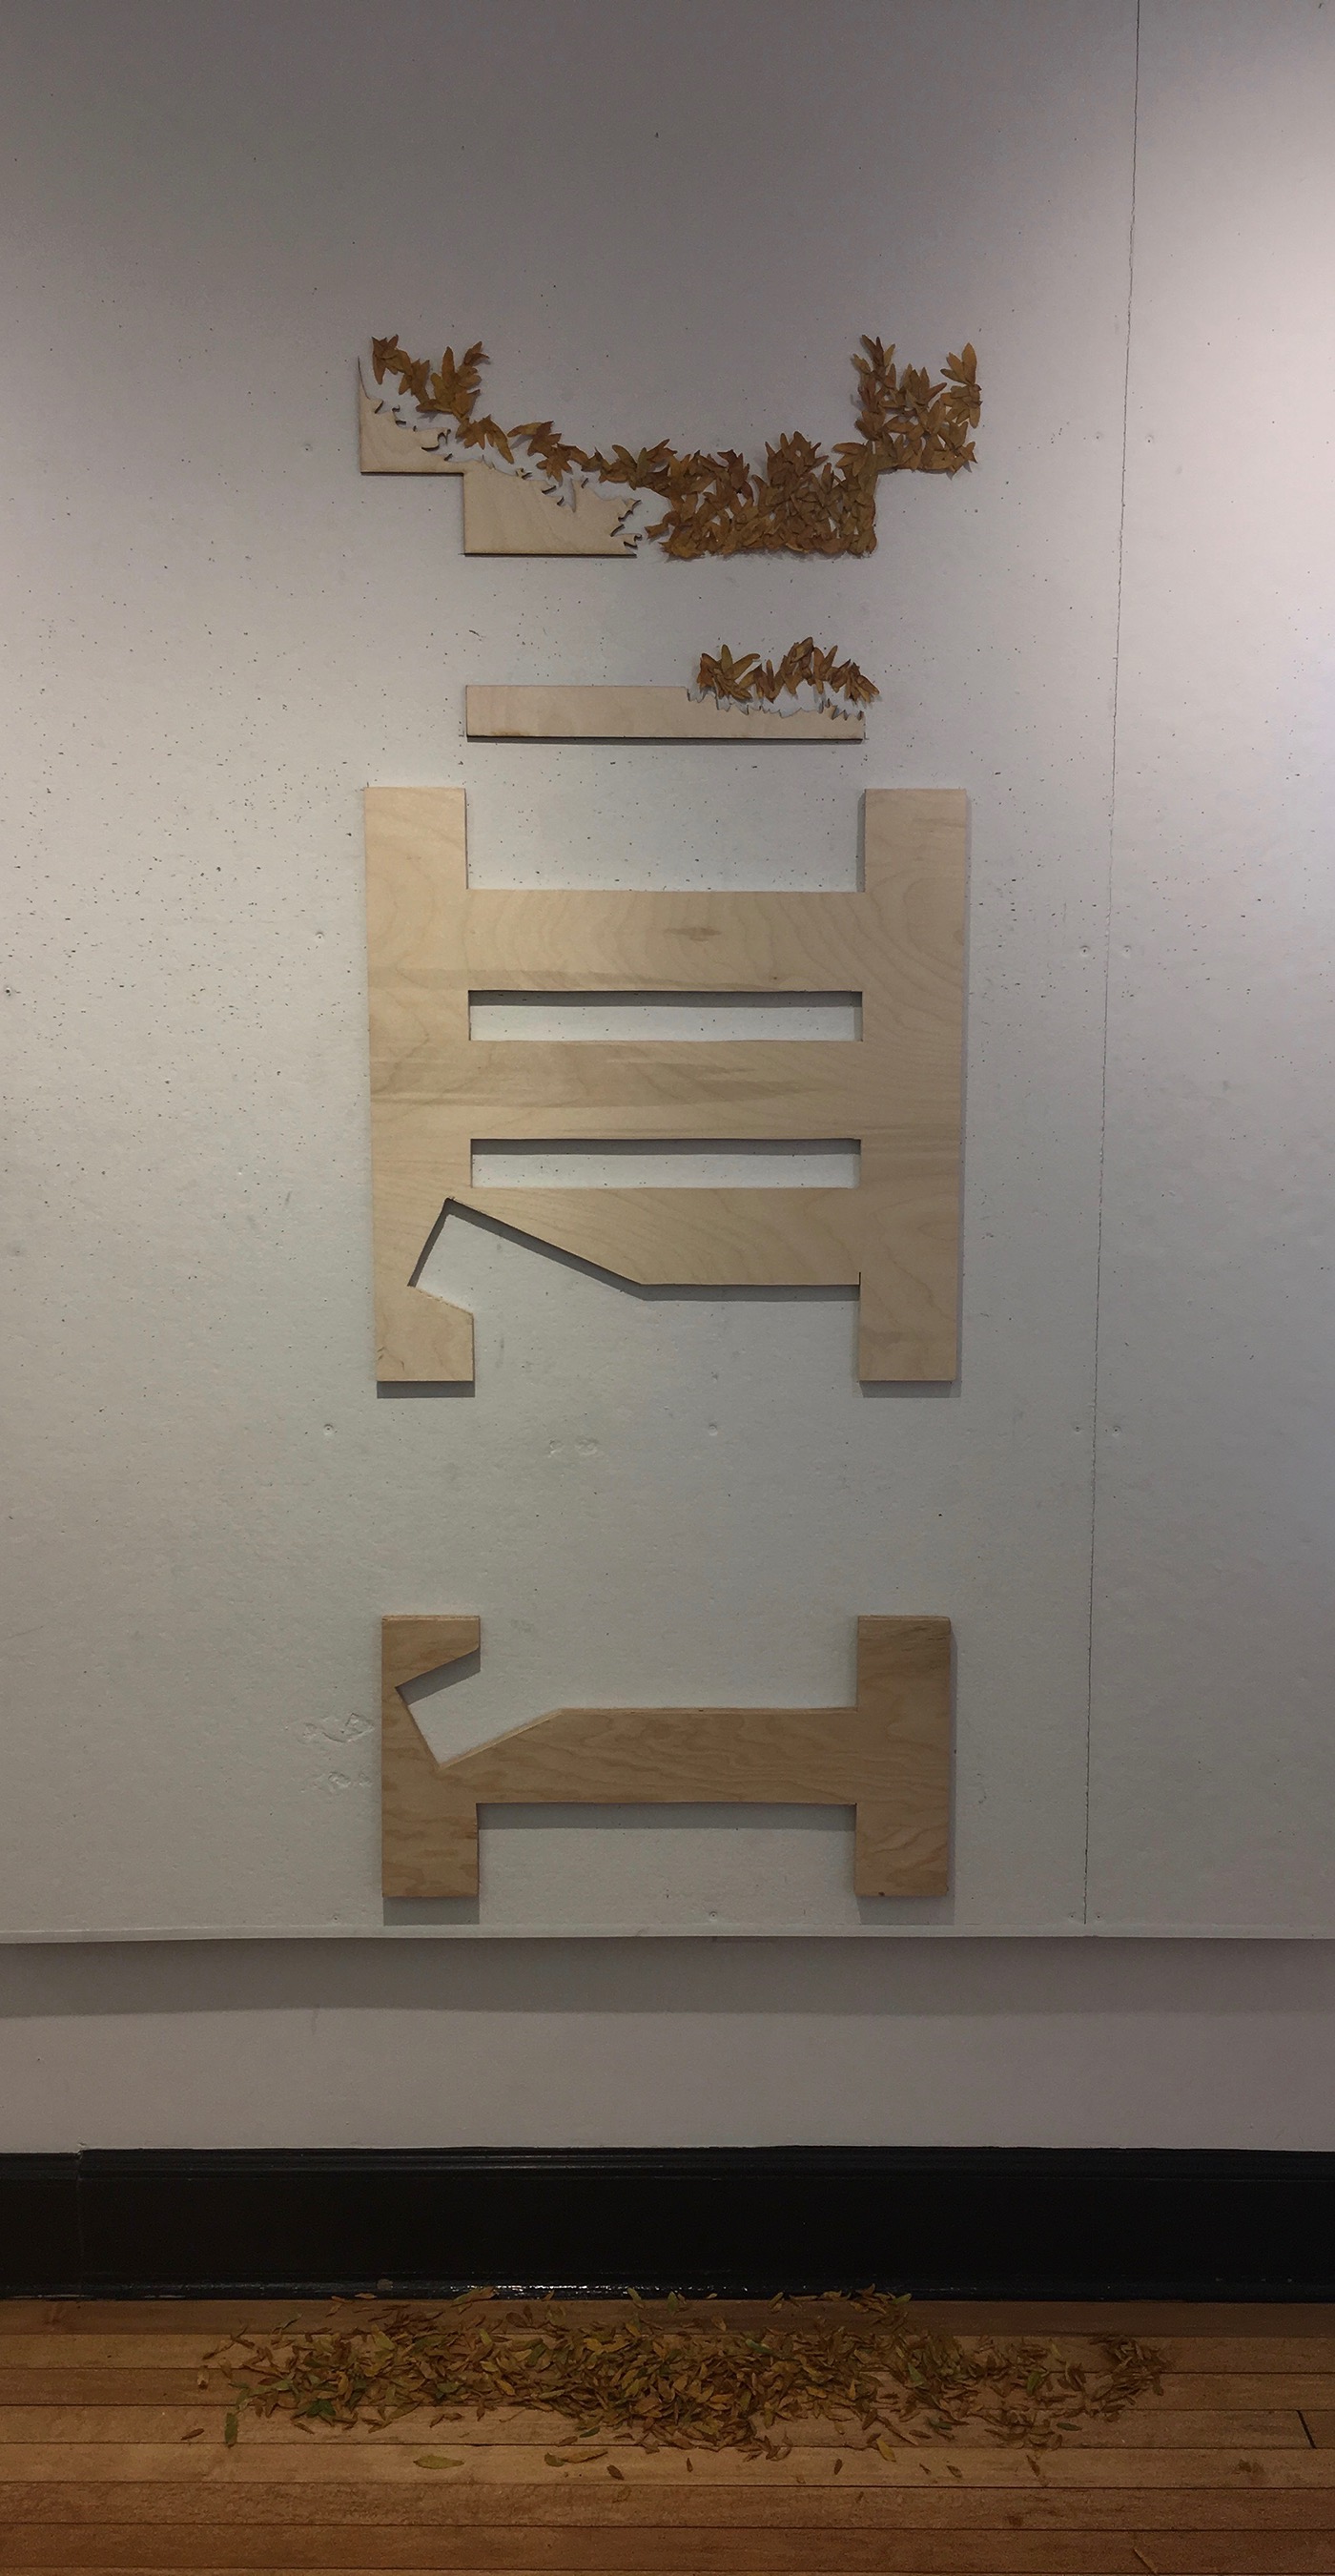 woodwork installation permanence impermanence design foundations mimi cabell typography  